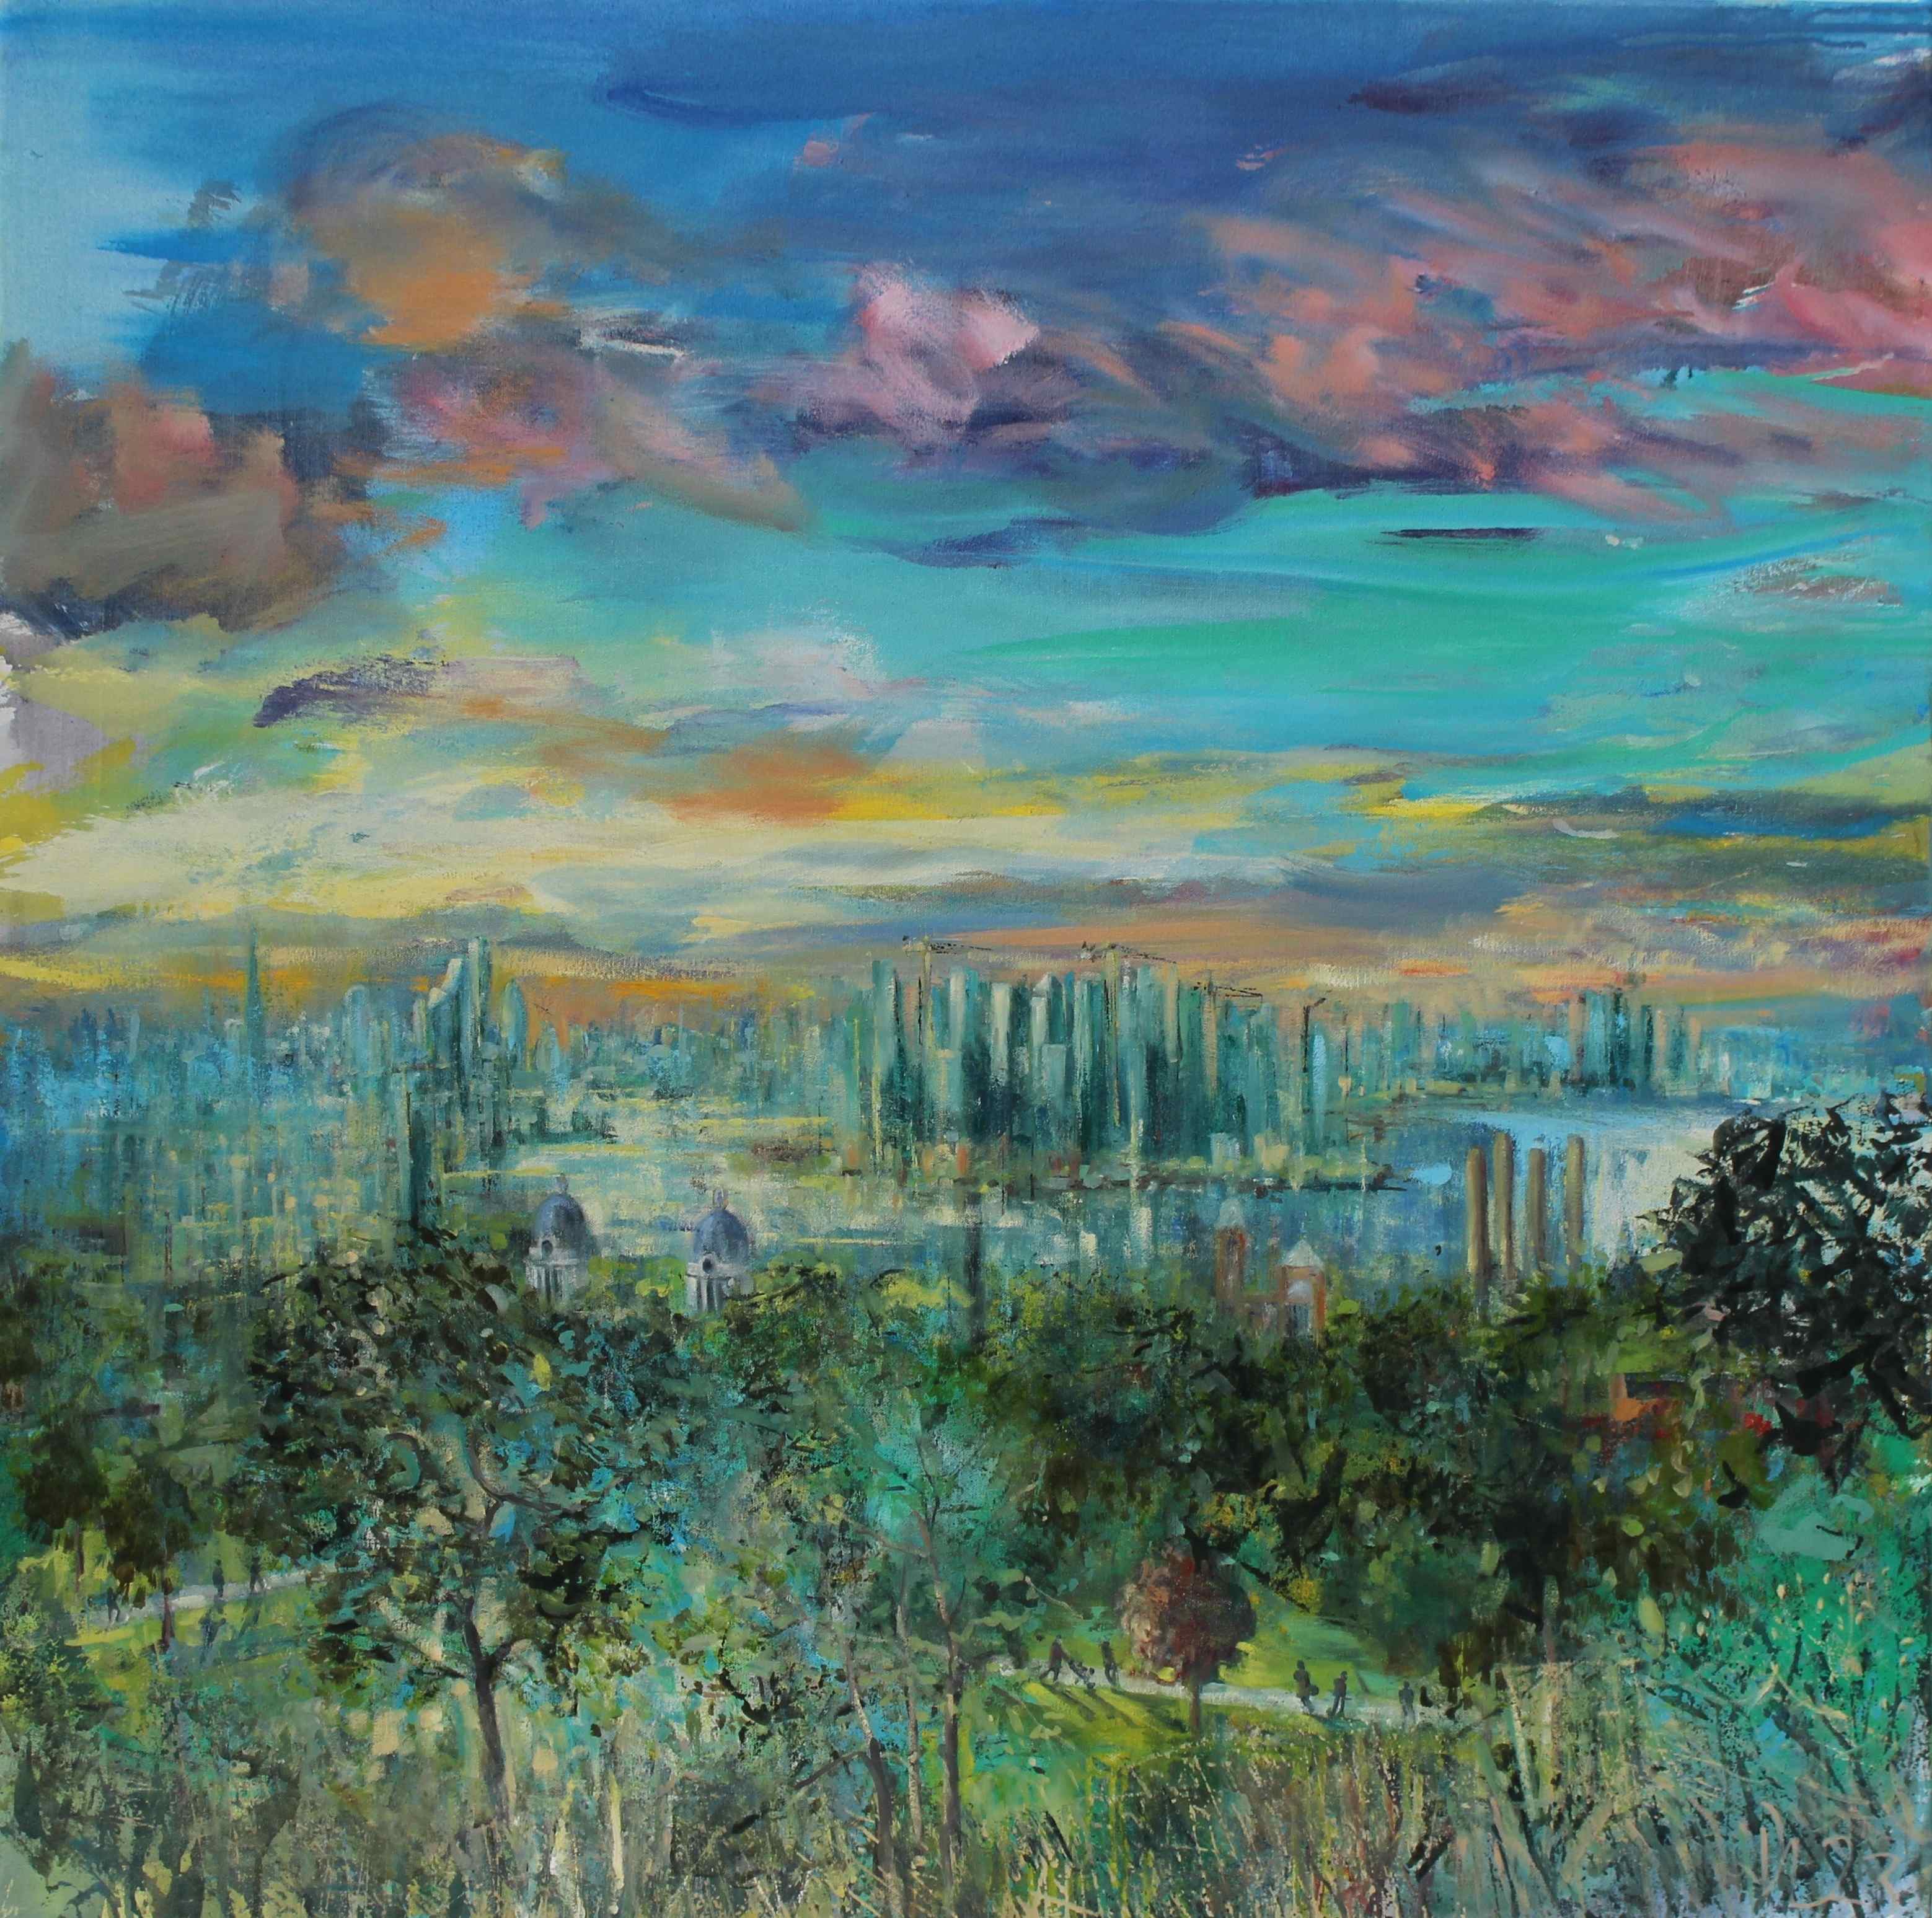 Evening, GreenwichPark. Oil on canvas.100x100cm.